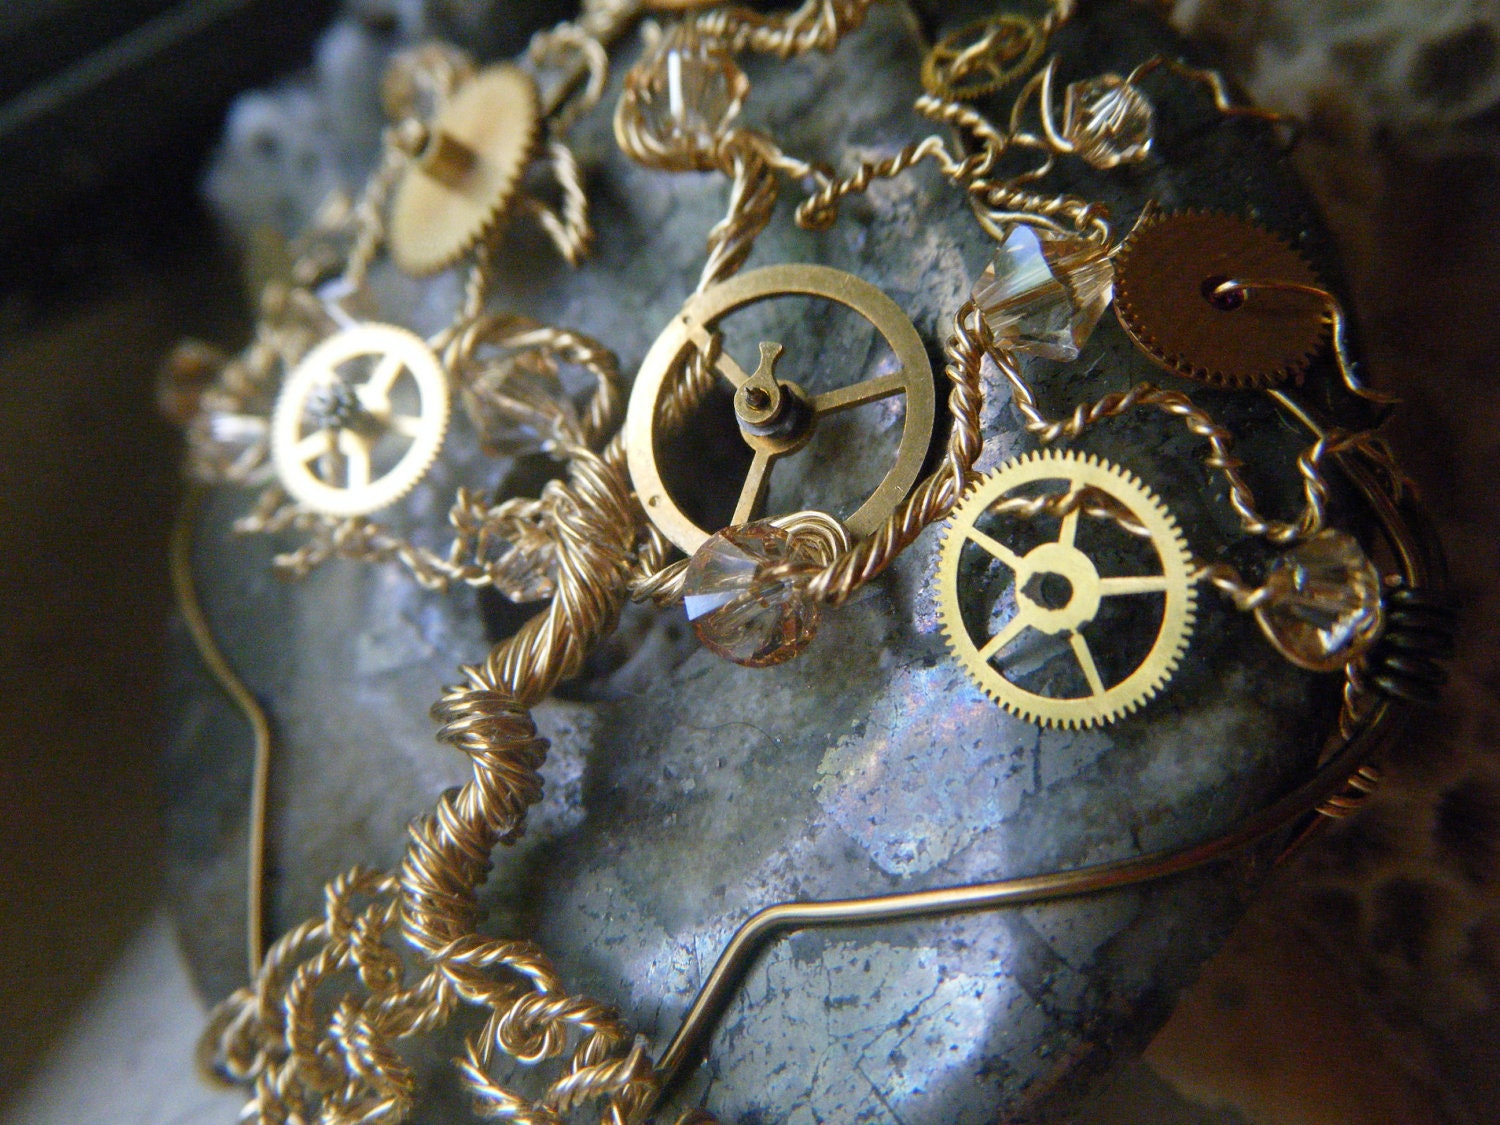 Steampunk Tree of Life Pendant -  Pyrite and Swarovski Crystals - Gold and Watch Gears - fool's gold - Whimsical - JbellsGems